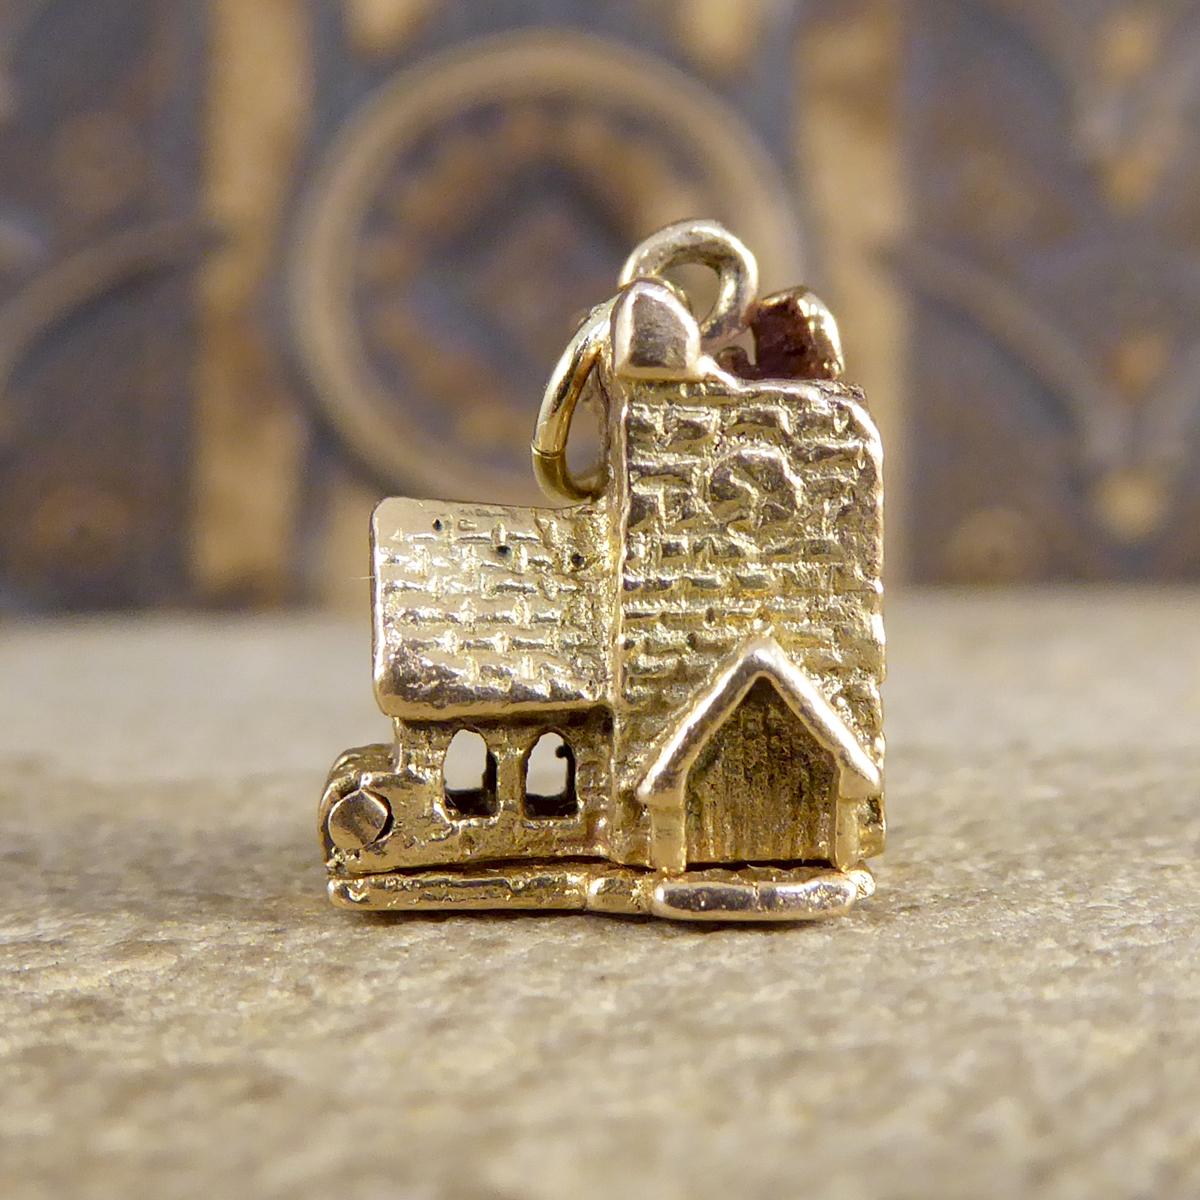 A great 9ct Yellow Gold Vintage Charm that depicts a Church that opens to show a scene of two people stood getting married. The perfect gift, and can be worn on a charm bracelet or as a pendant on a chain with a loop already attached. 

Condition: